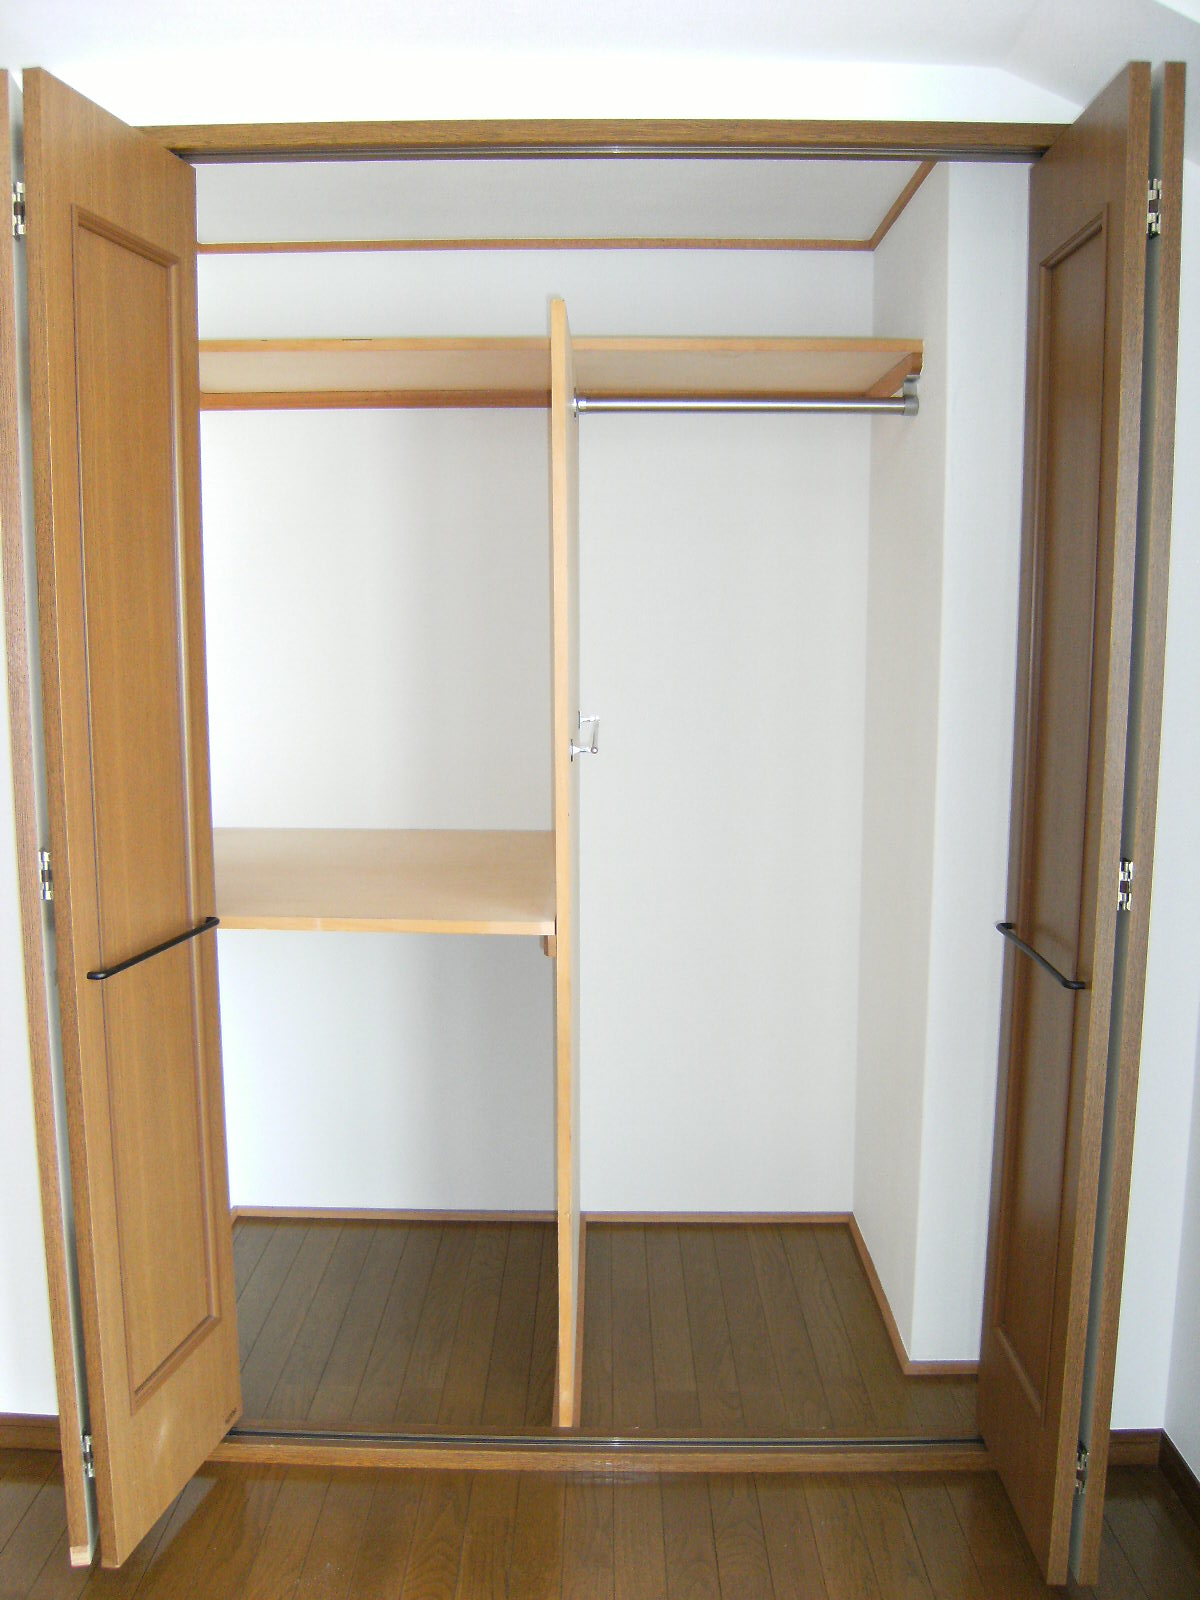 Receipt. Closet with depth and height